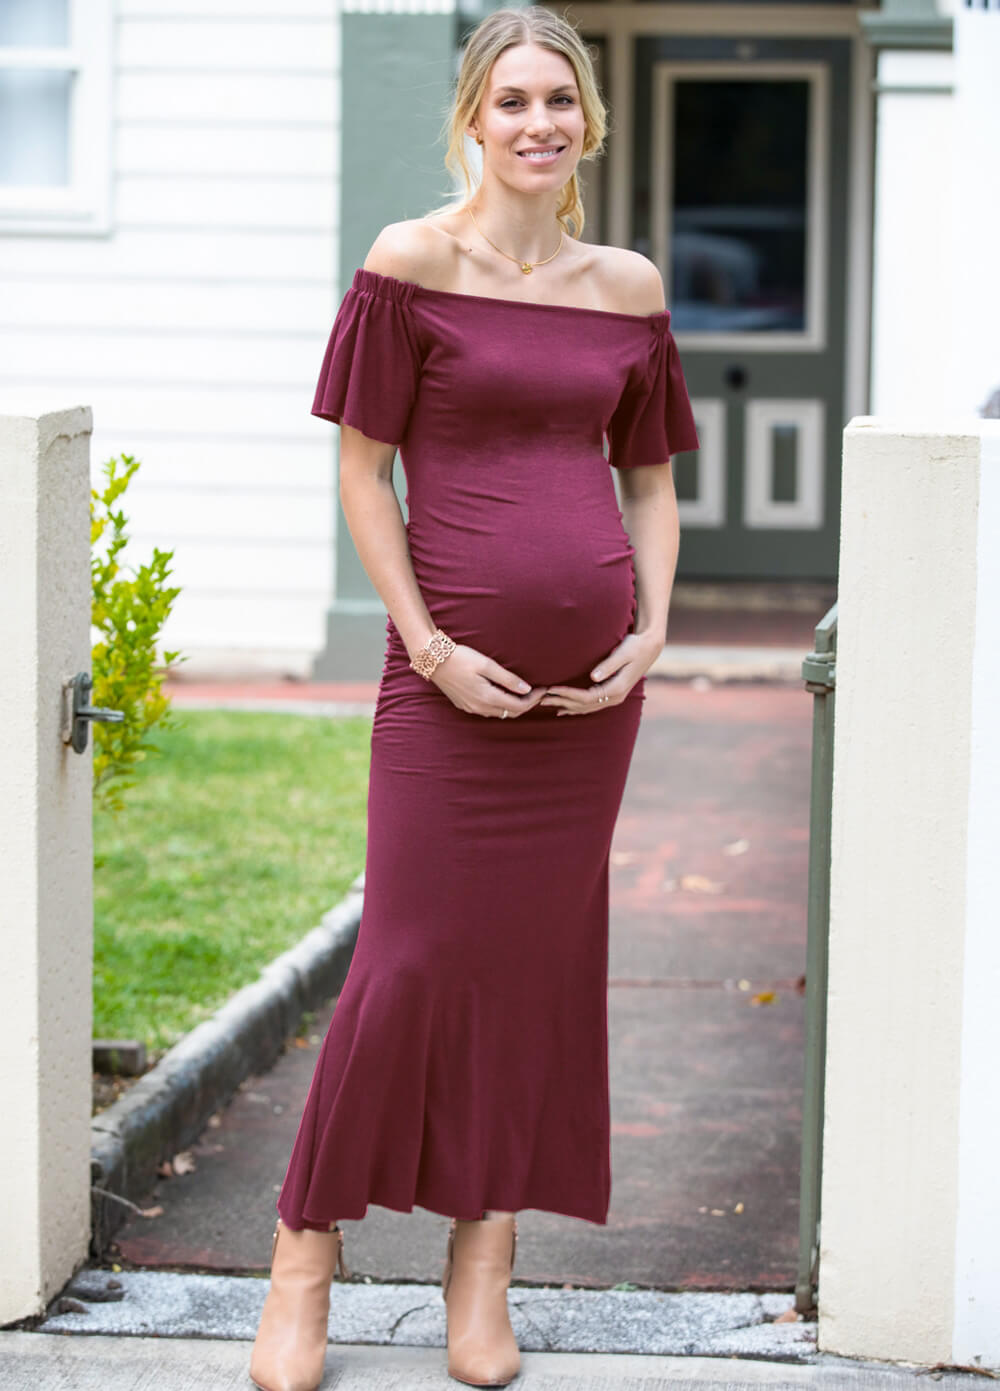 Maison Maternity Evening Maxi Dress in Wine by Lait & Co